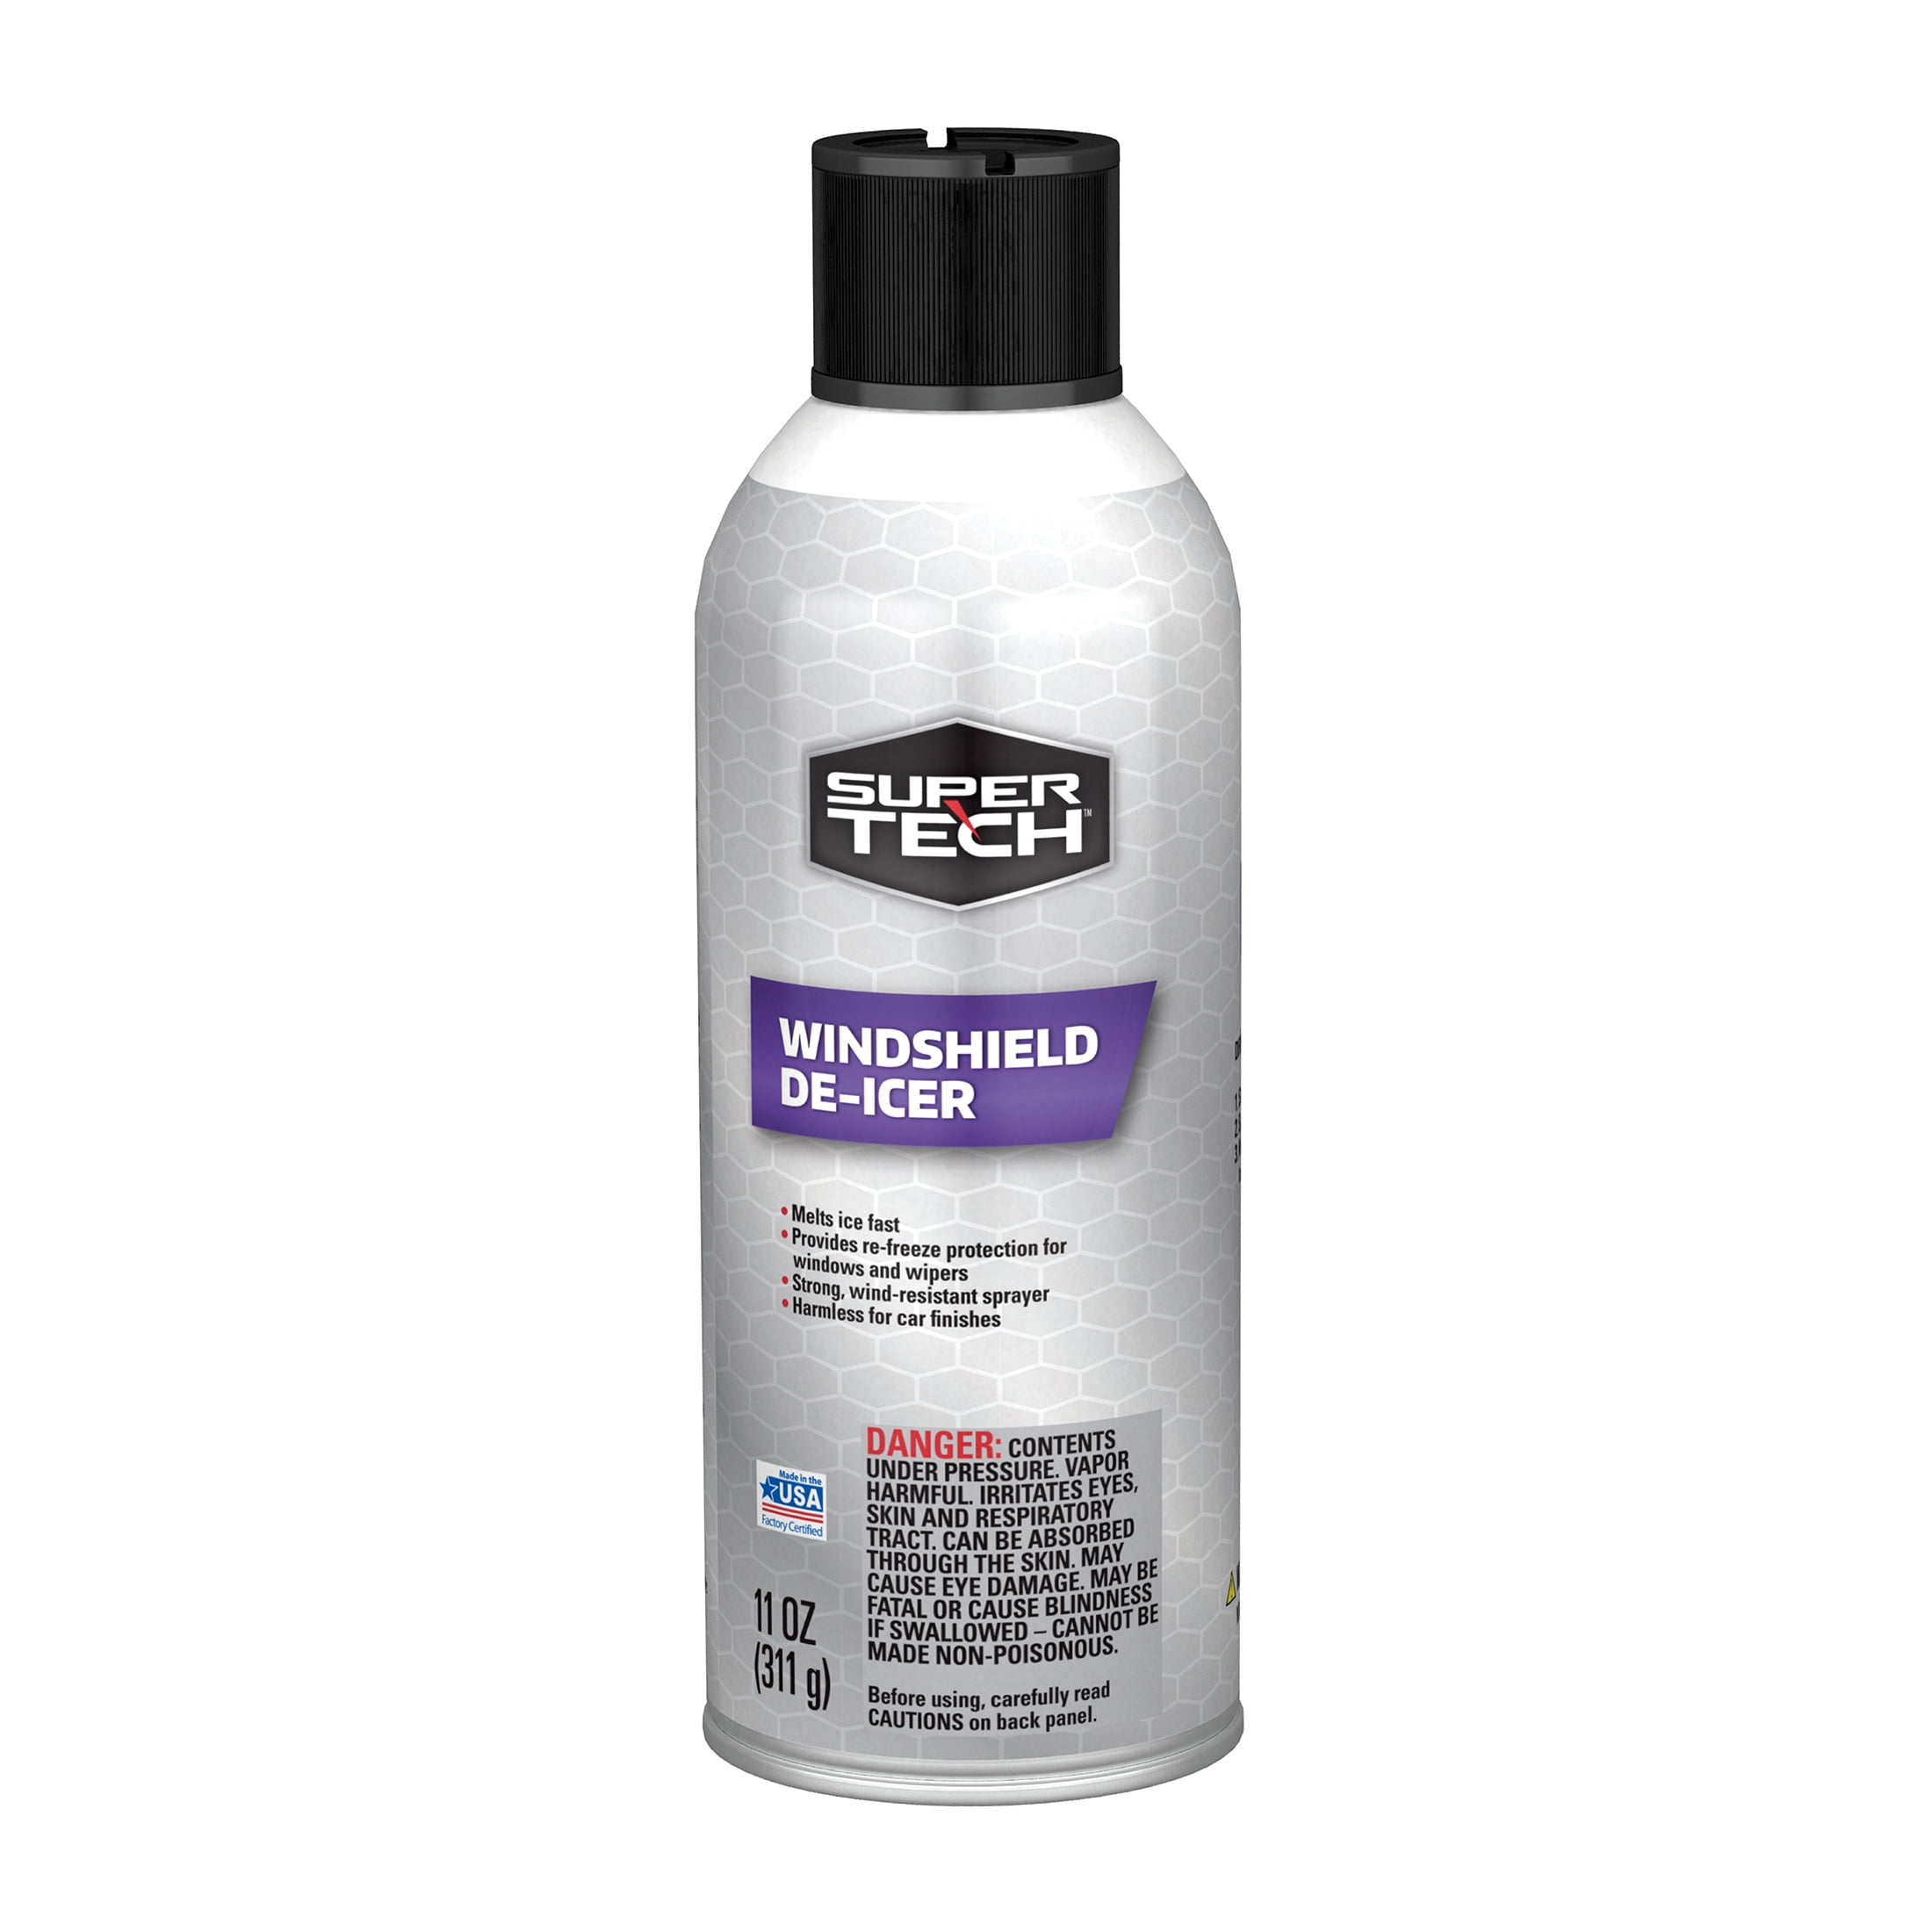 Superio Windshield De-Icer Spray, Melts Ice in Seconds from Windows, M